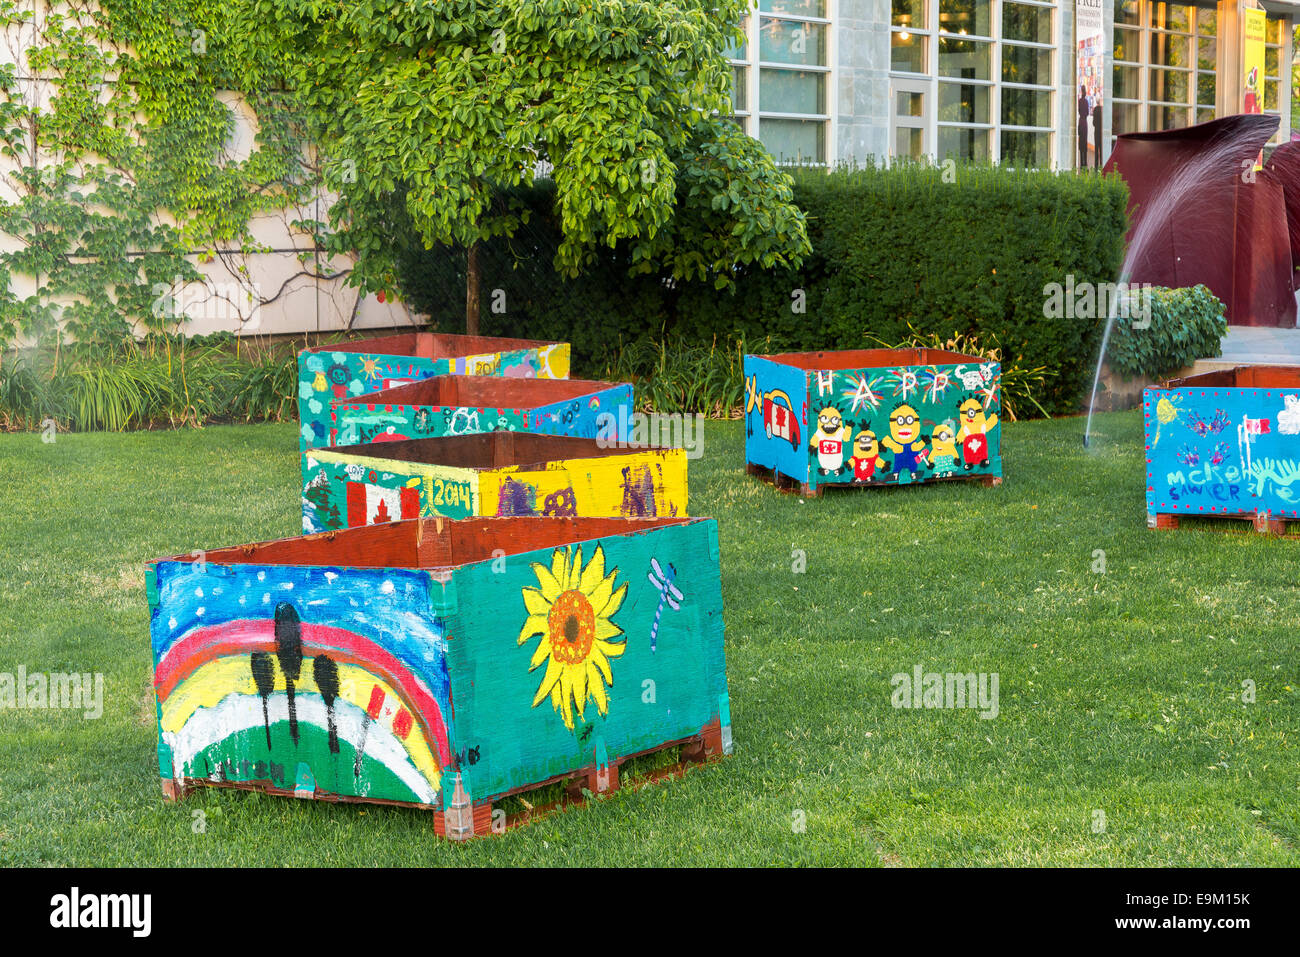 Painted fruit crates, decorate the lawn outside the Kelowna Art Gallery, Kelowna, British Columbia, Canada Stock Photo